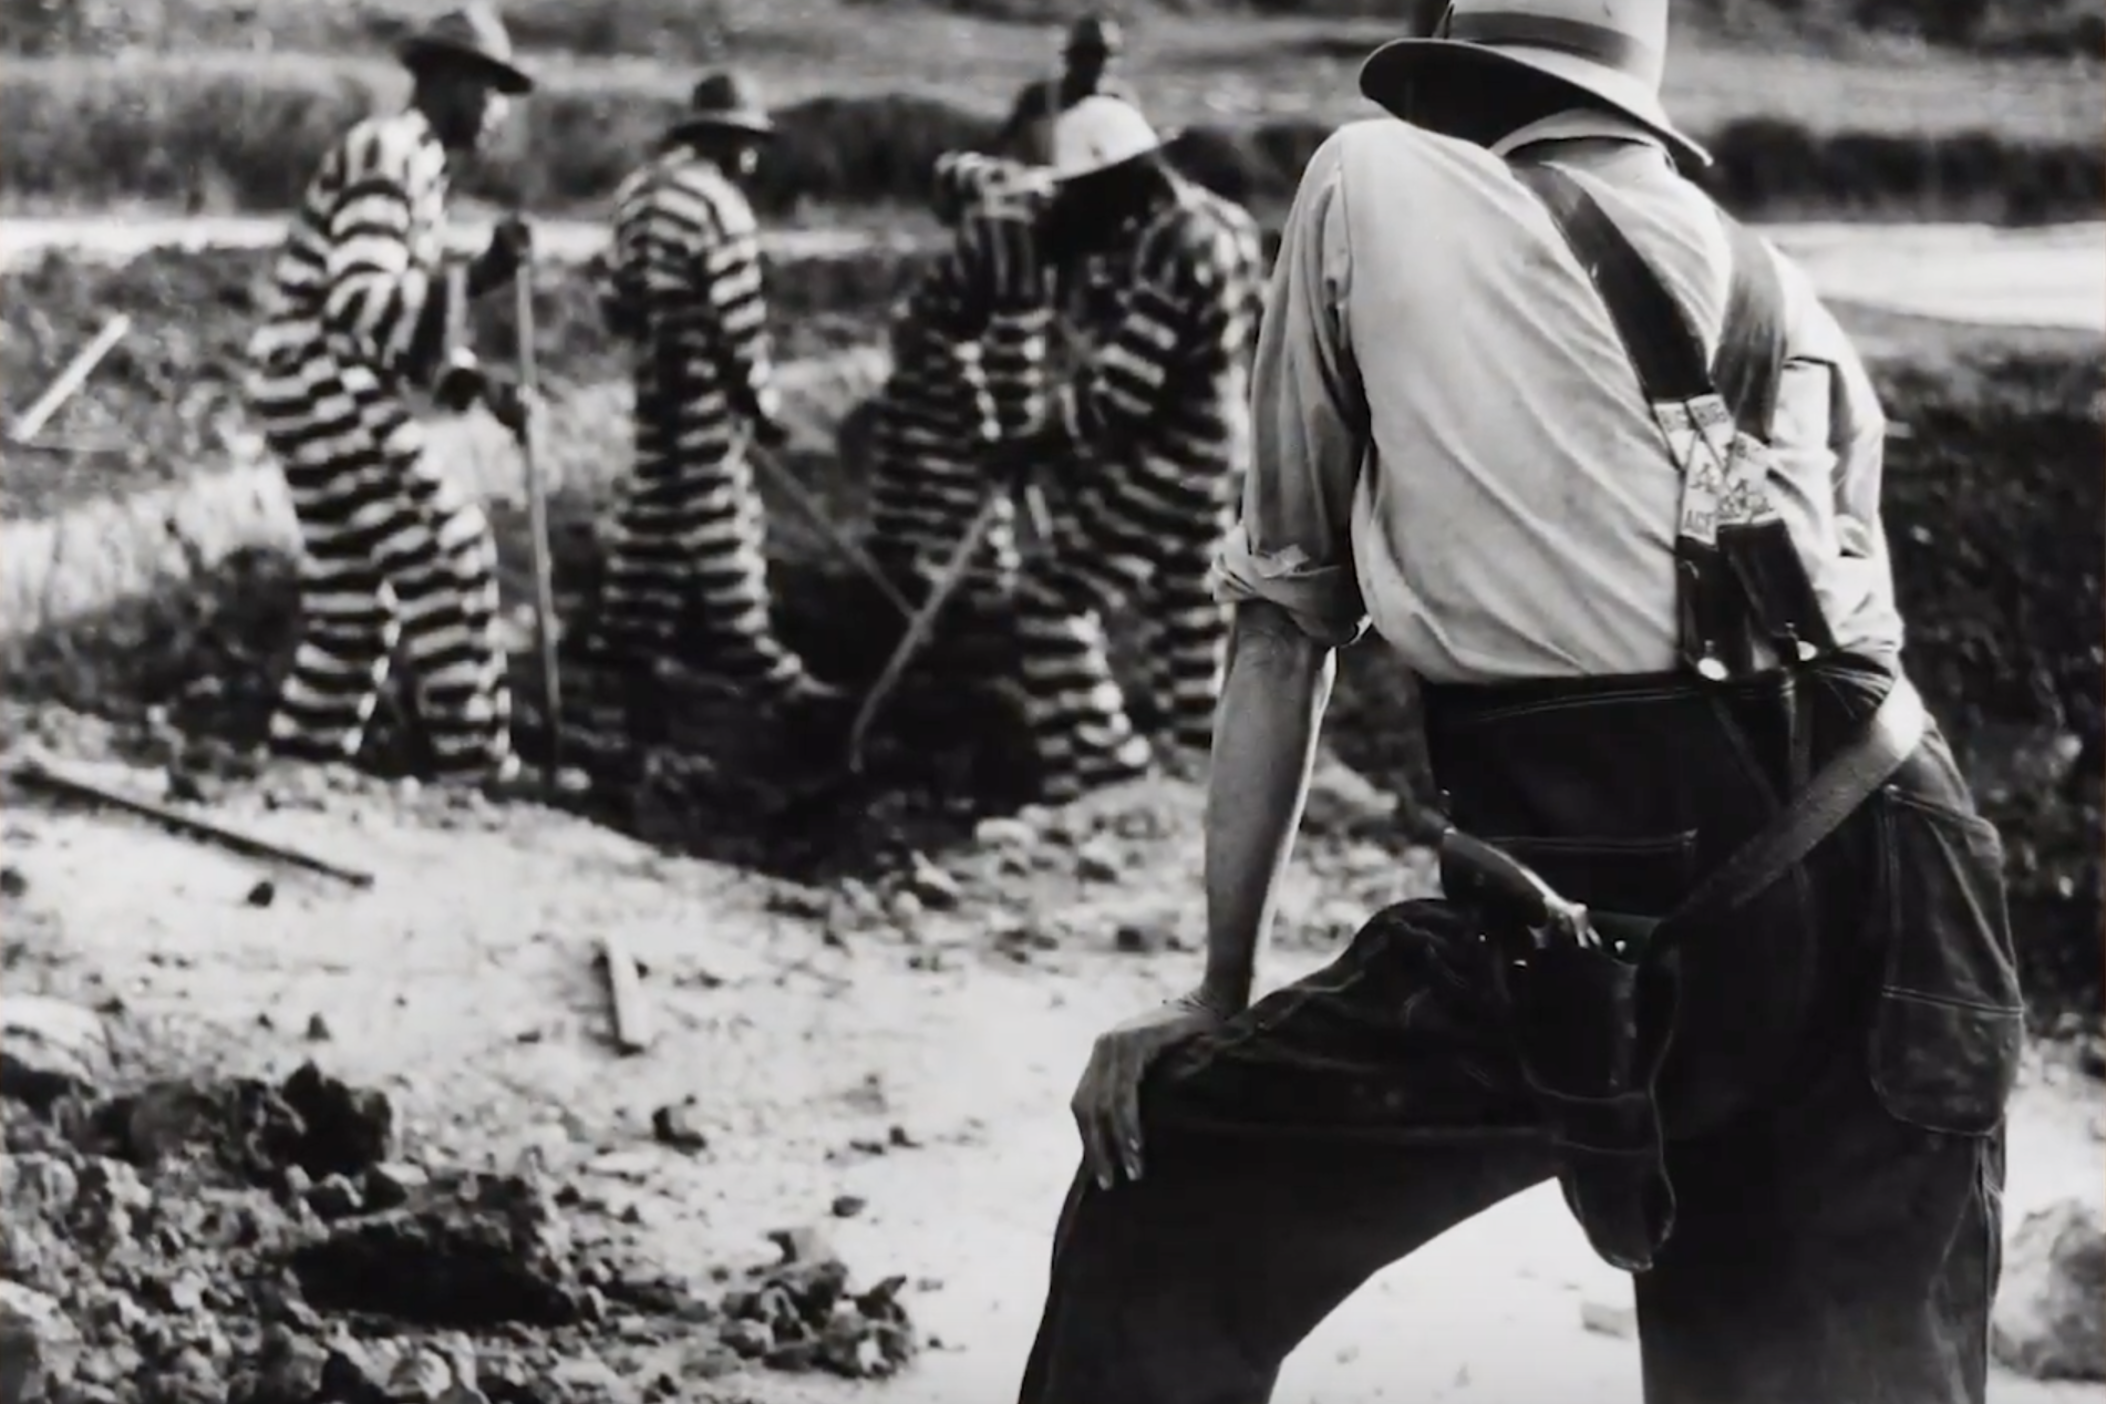 An armed guard oversees prisoners at a postbellum Georgia work camp.